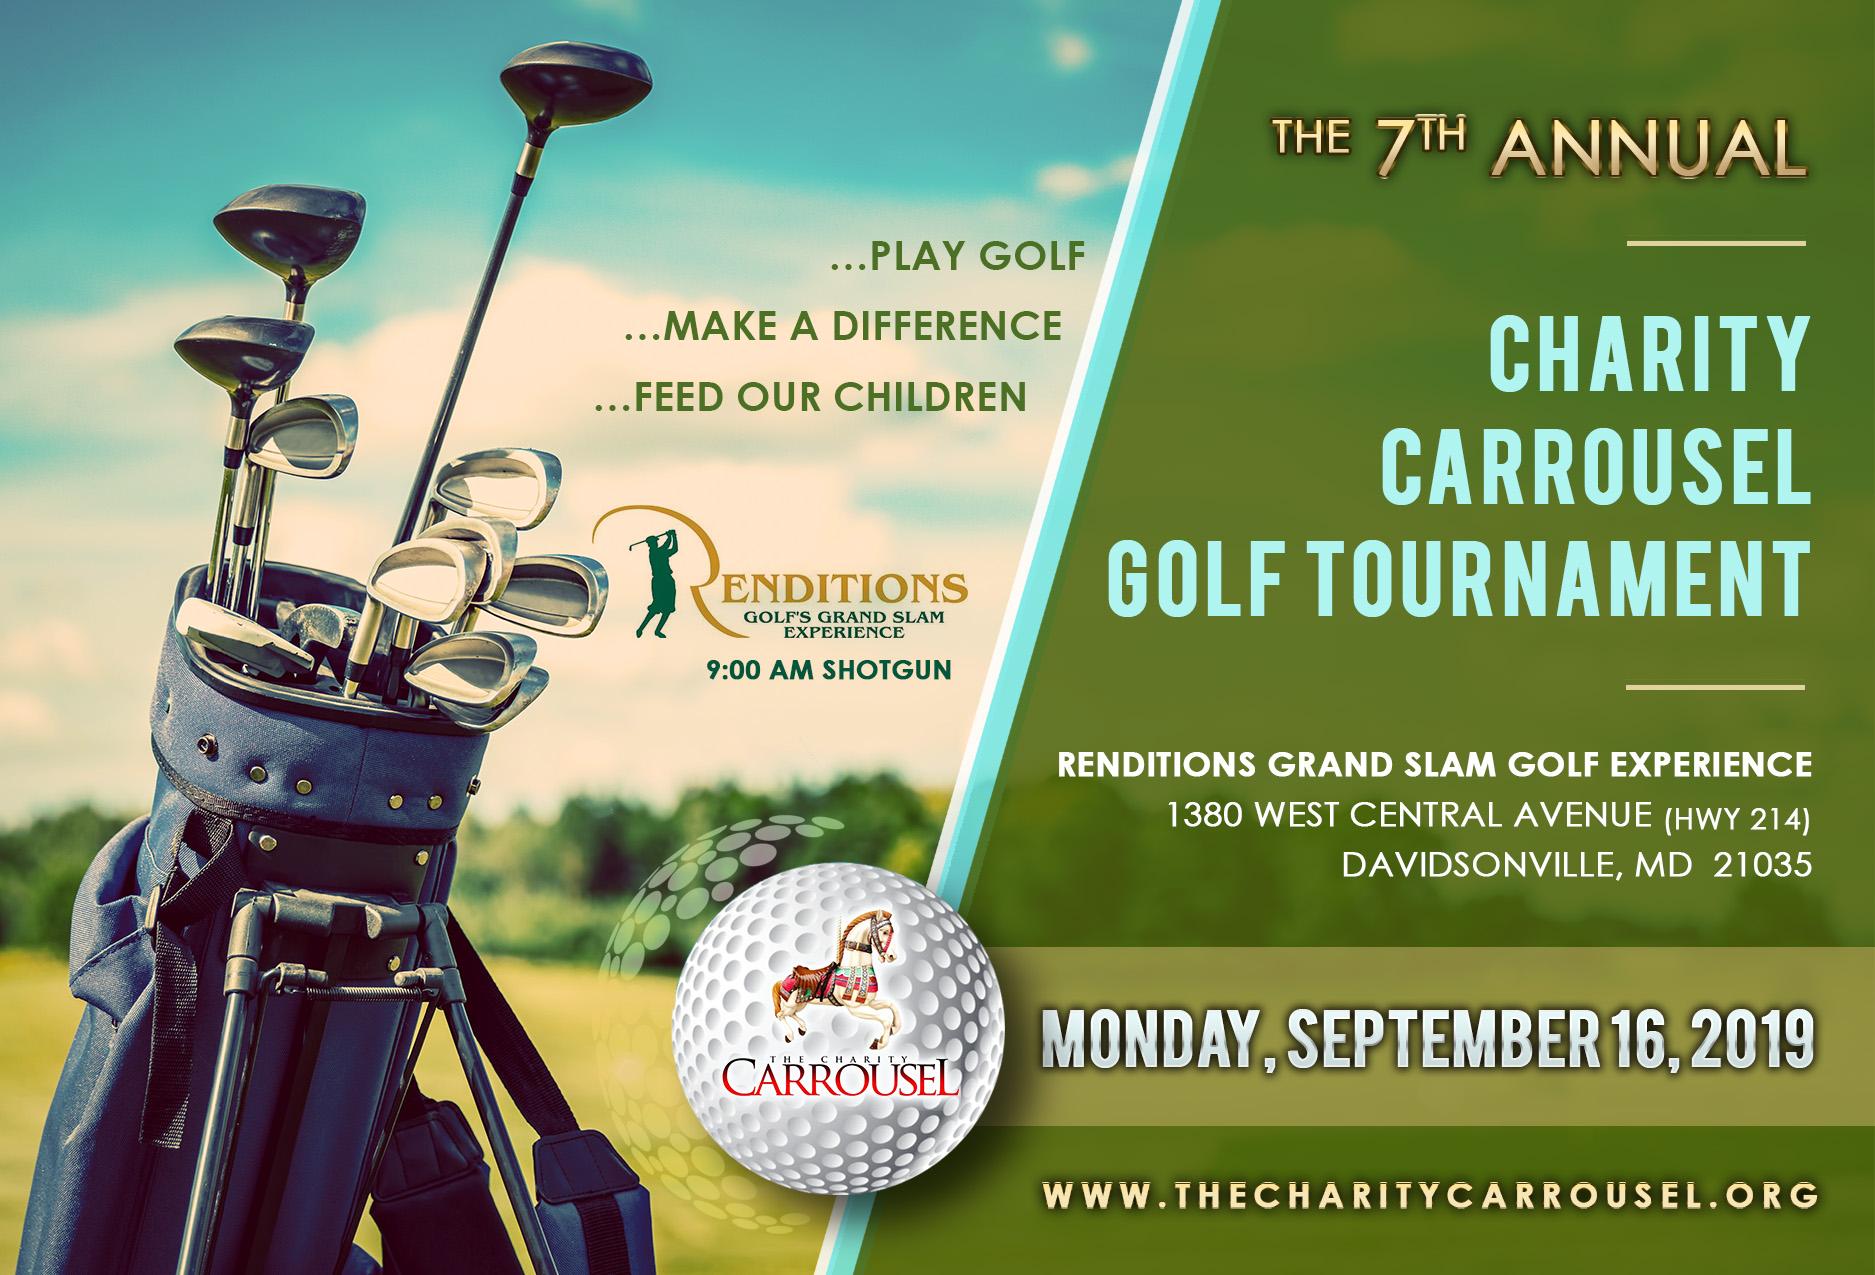 The Charity Carrousel 7th Annual Golf Tournament